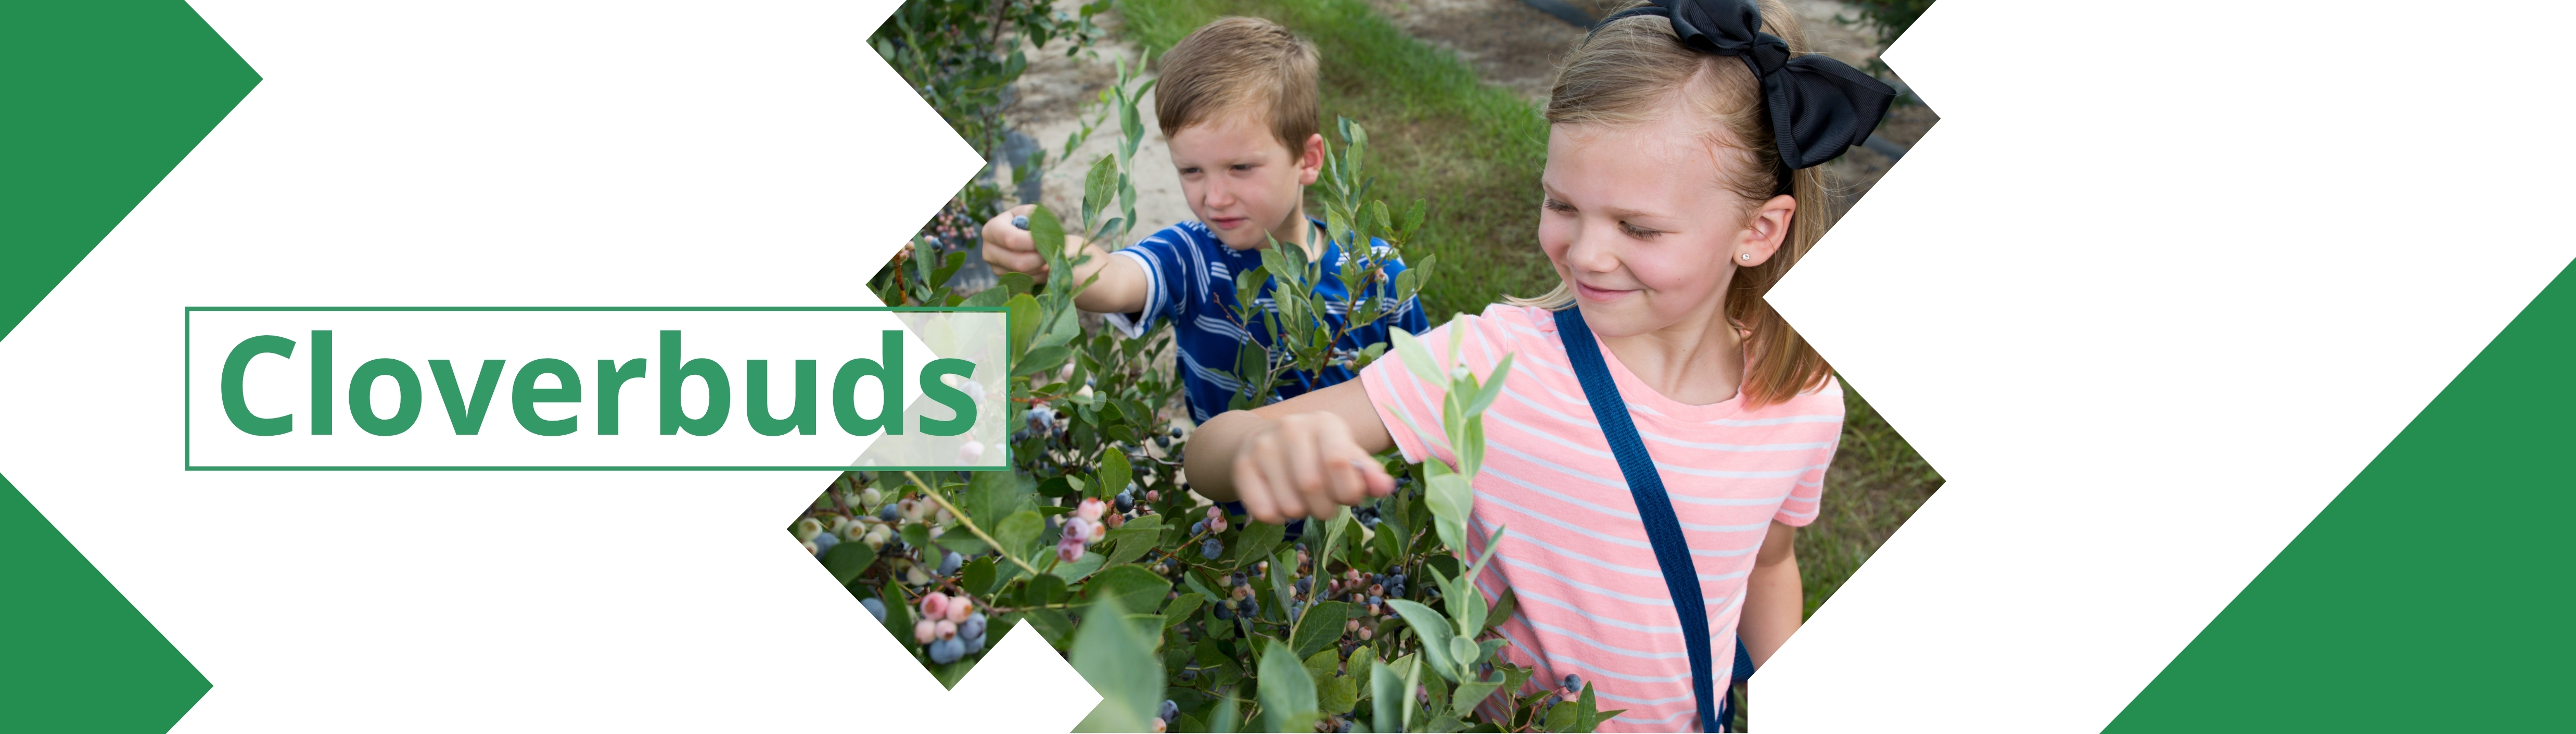 Banner image with 2 youth picking blueberries